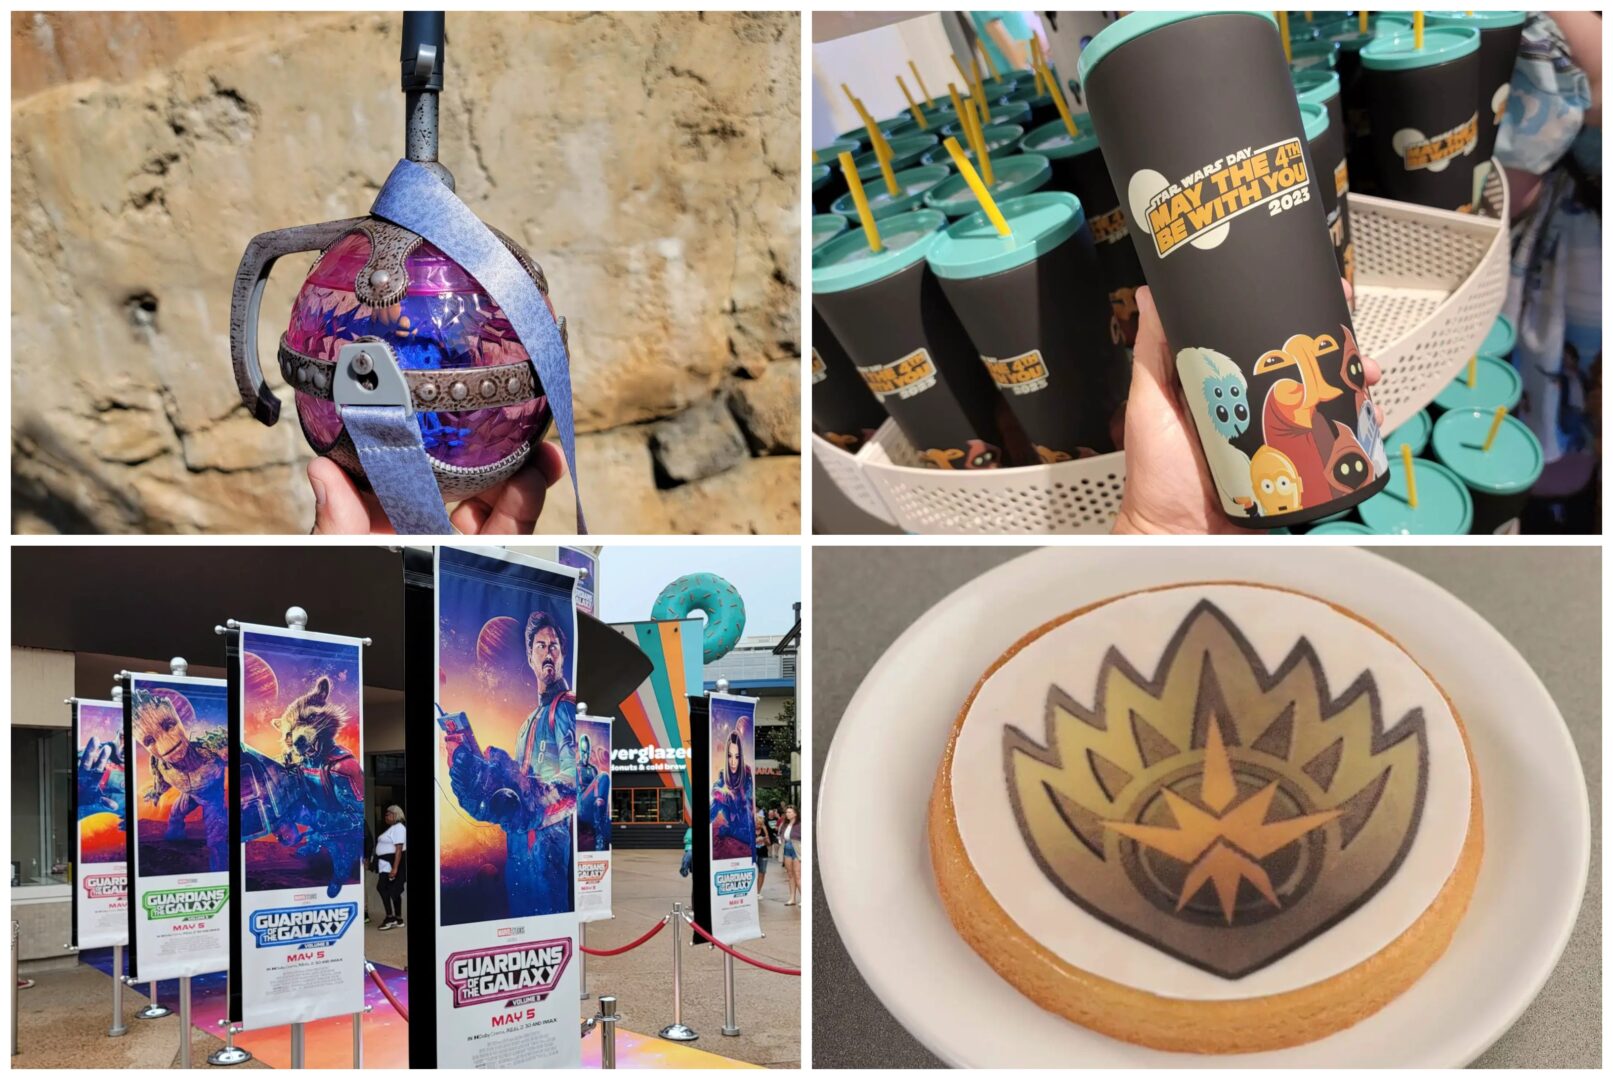 Disney News Highlights: May the 4th Be With You at WDW, GOTG Vol. 3 Goodies at the Parks, Mother’s Day Food and Drinks, The Little Mermaid Loungefly